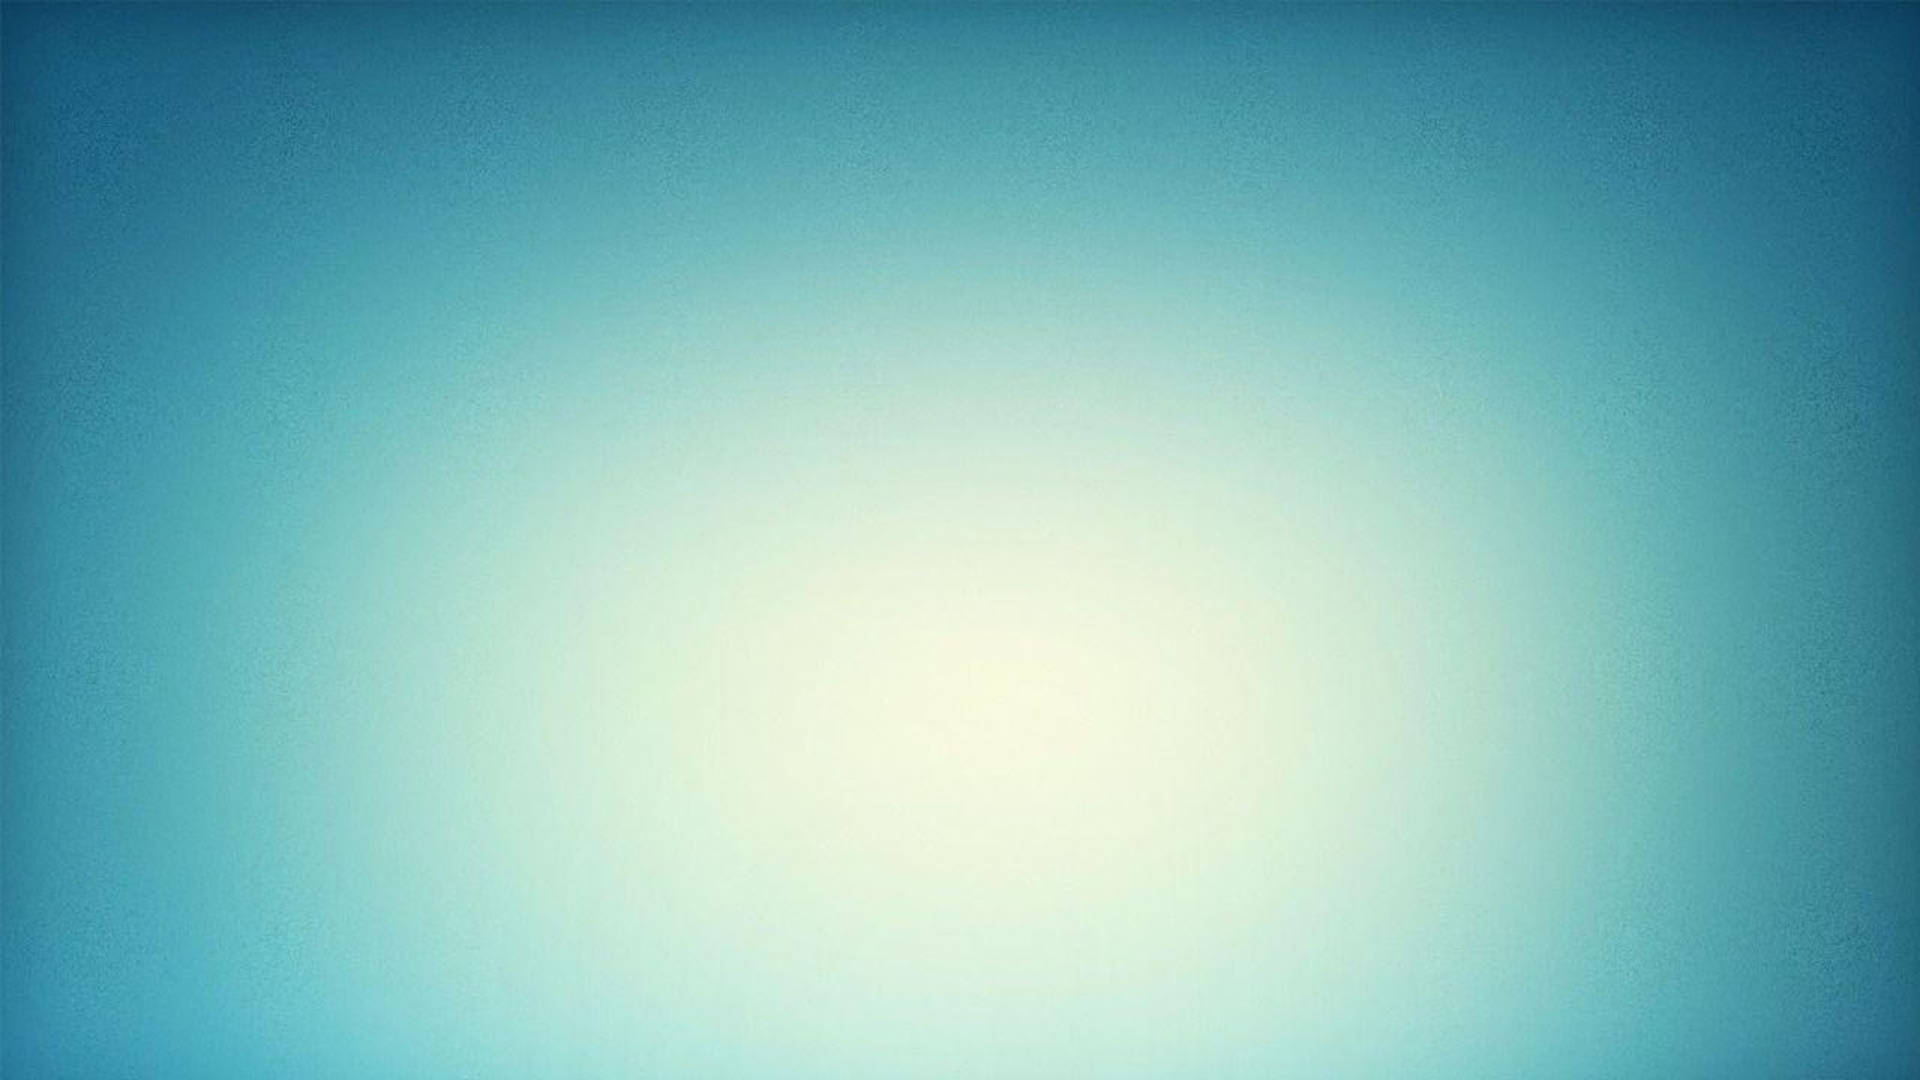 Blank Blurry Teal Background Wallpaper